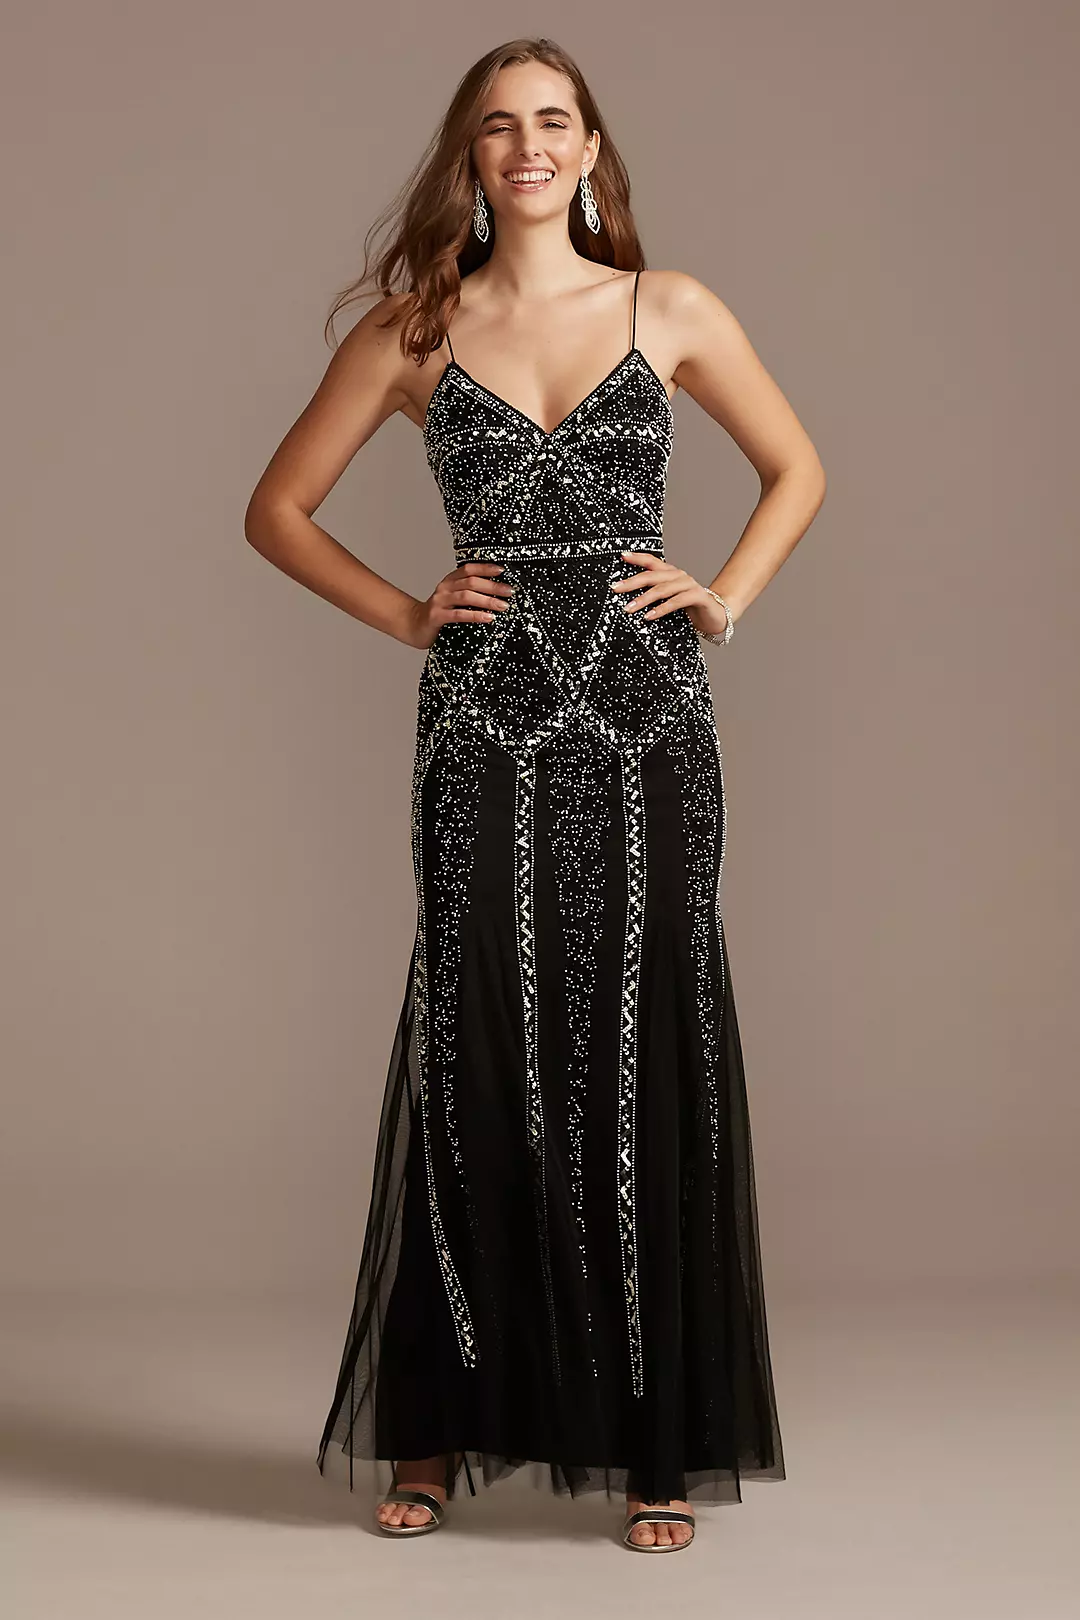 Linear Bead and Sequin Spaghetti Strap Dress Image